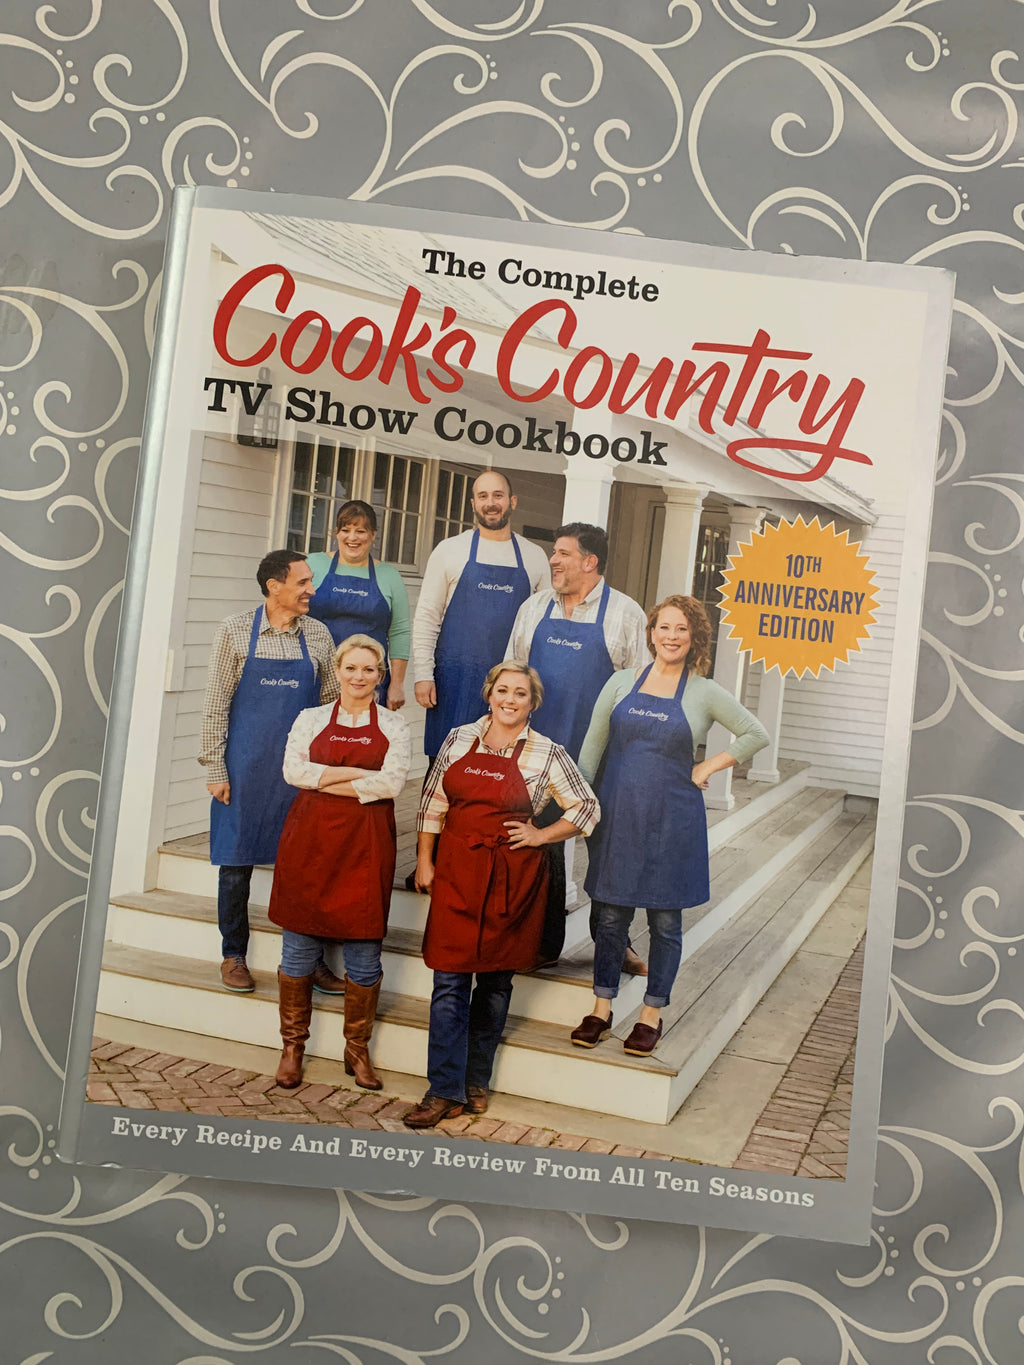 The Complete Cook's Country TV Show Cookbook: 10th Anniversary Edition